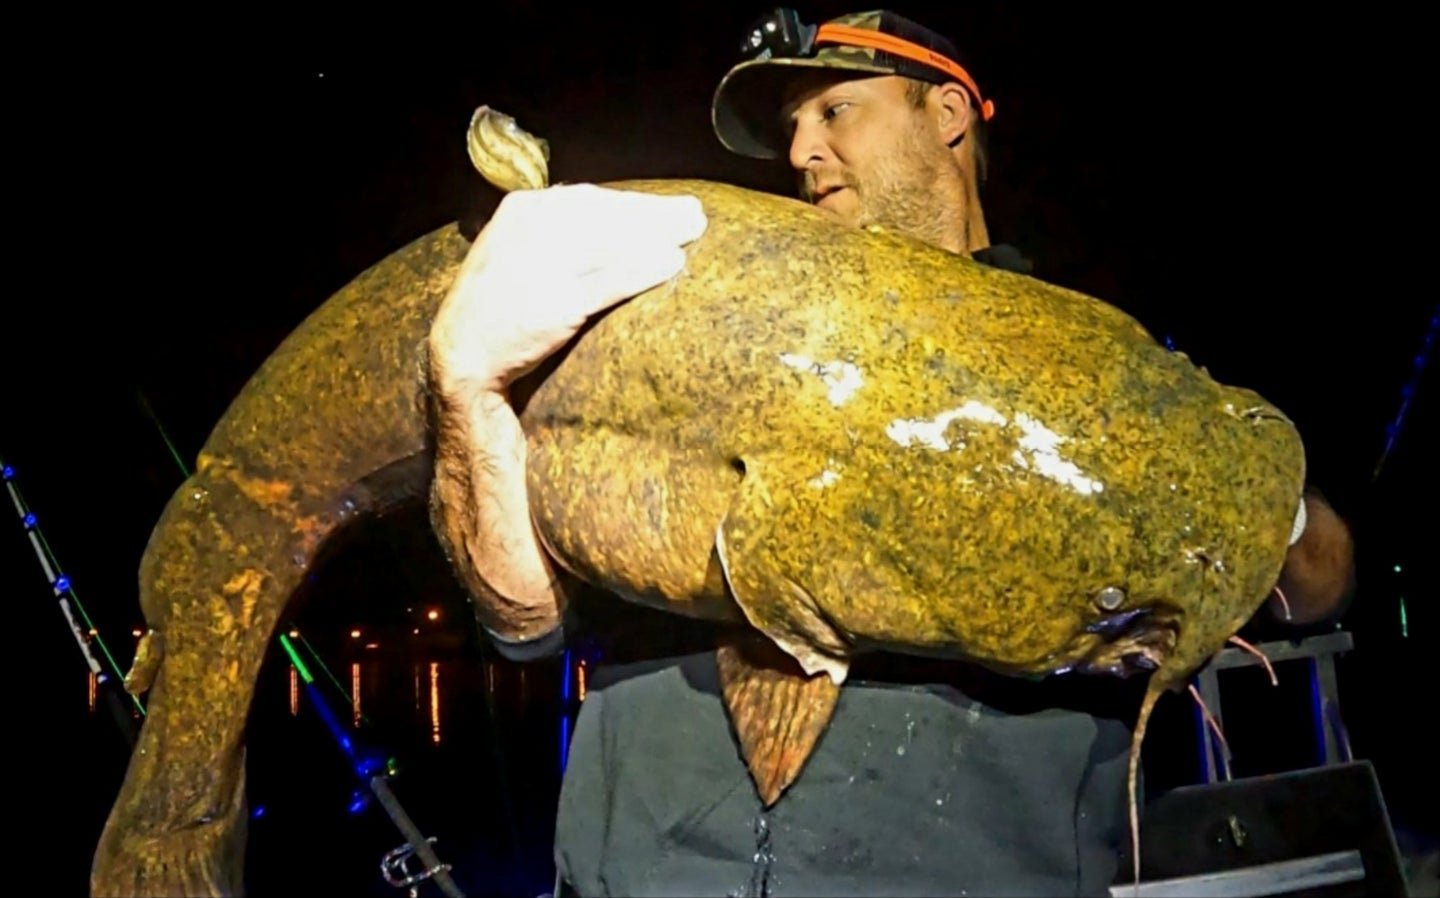 Check out this giant 'river monster' caught in West Virginia